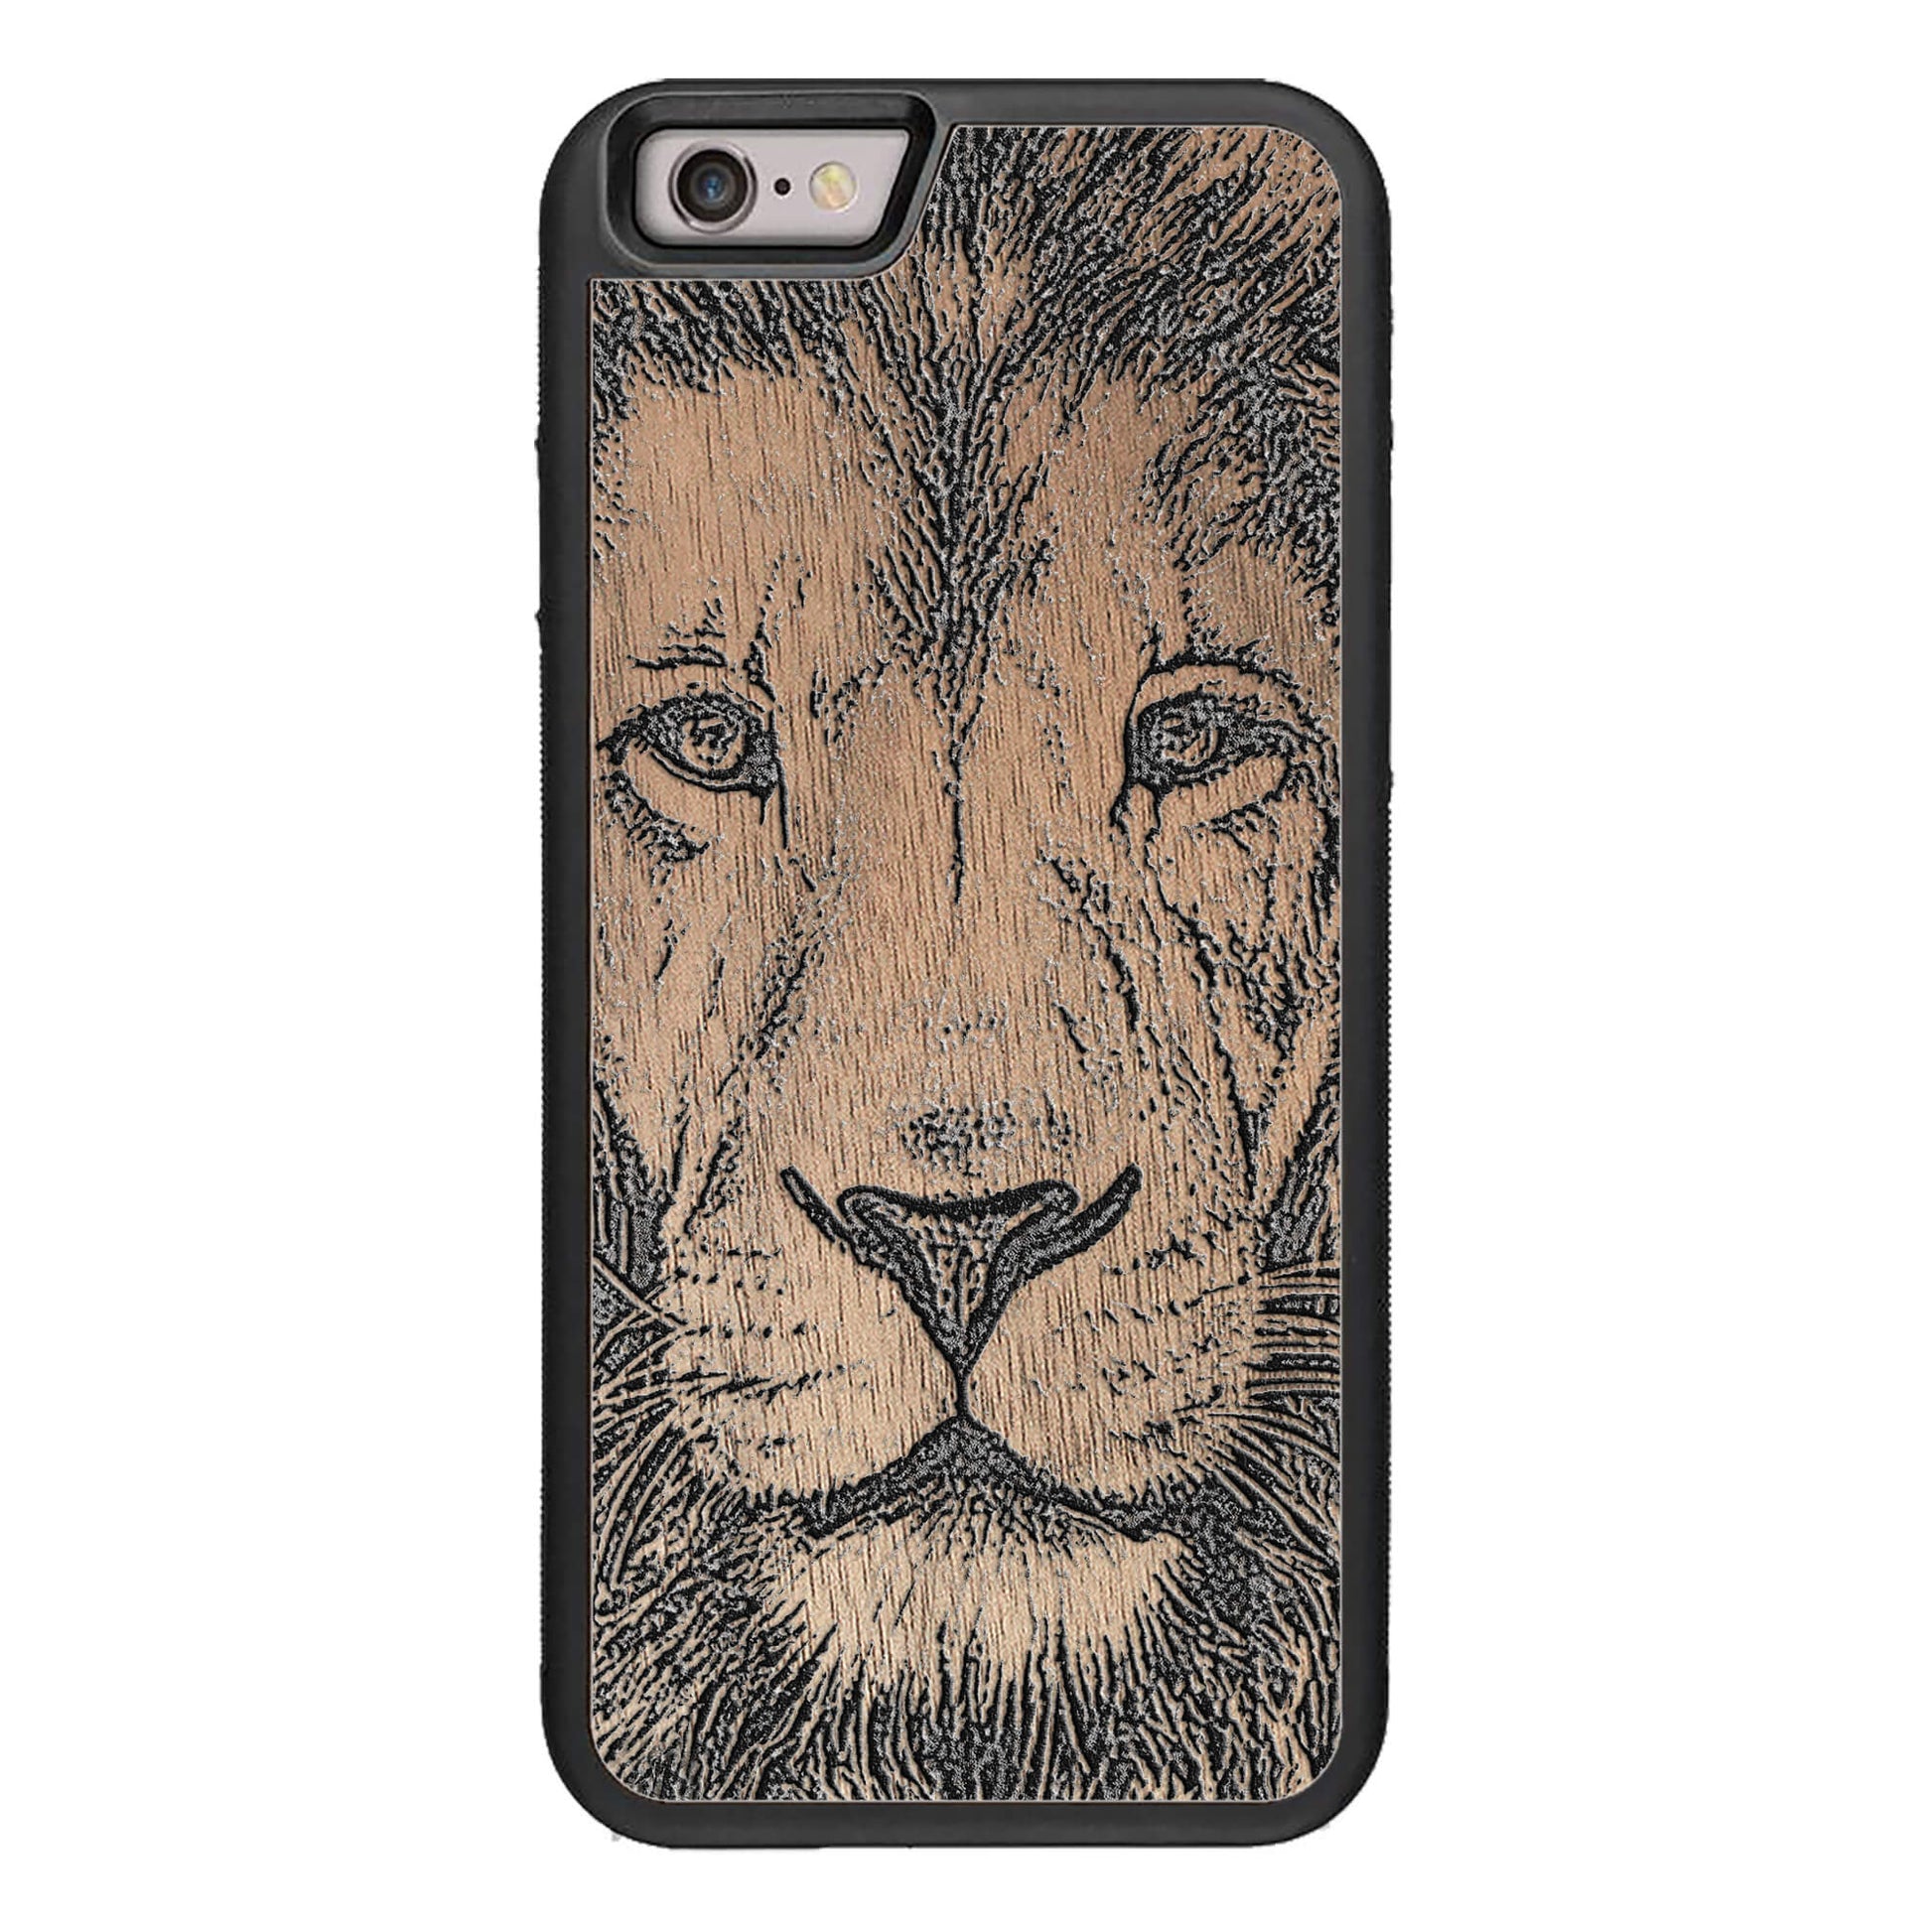 Wooden Case for iPhone 6/6S Lion